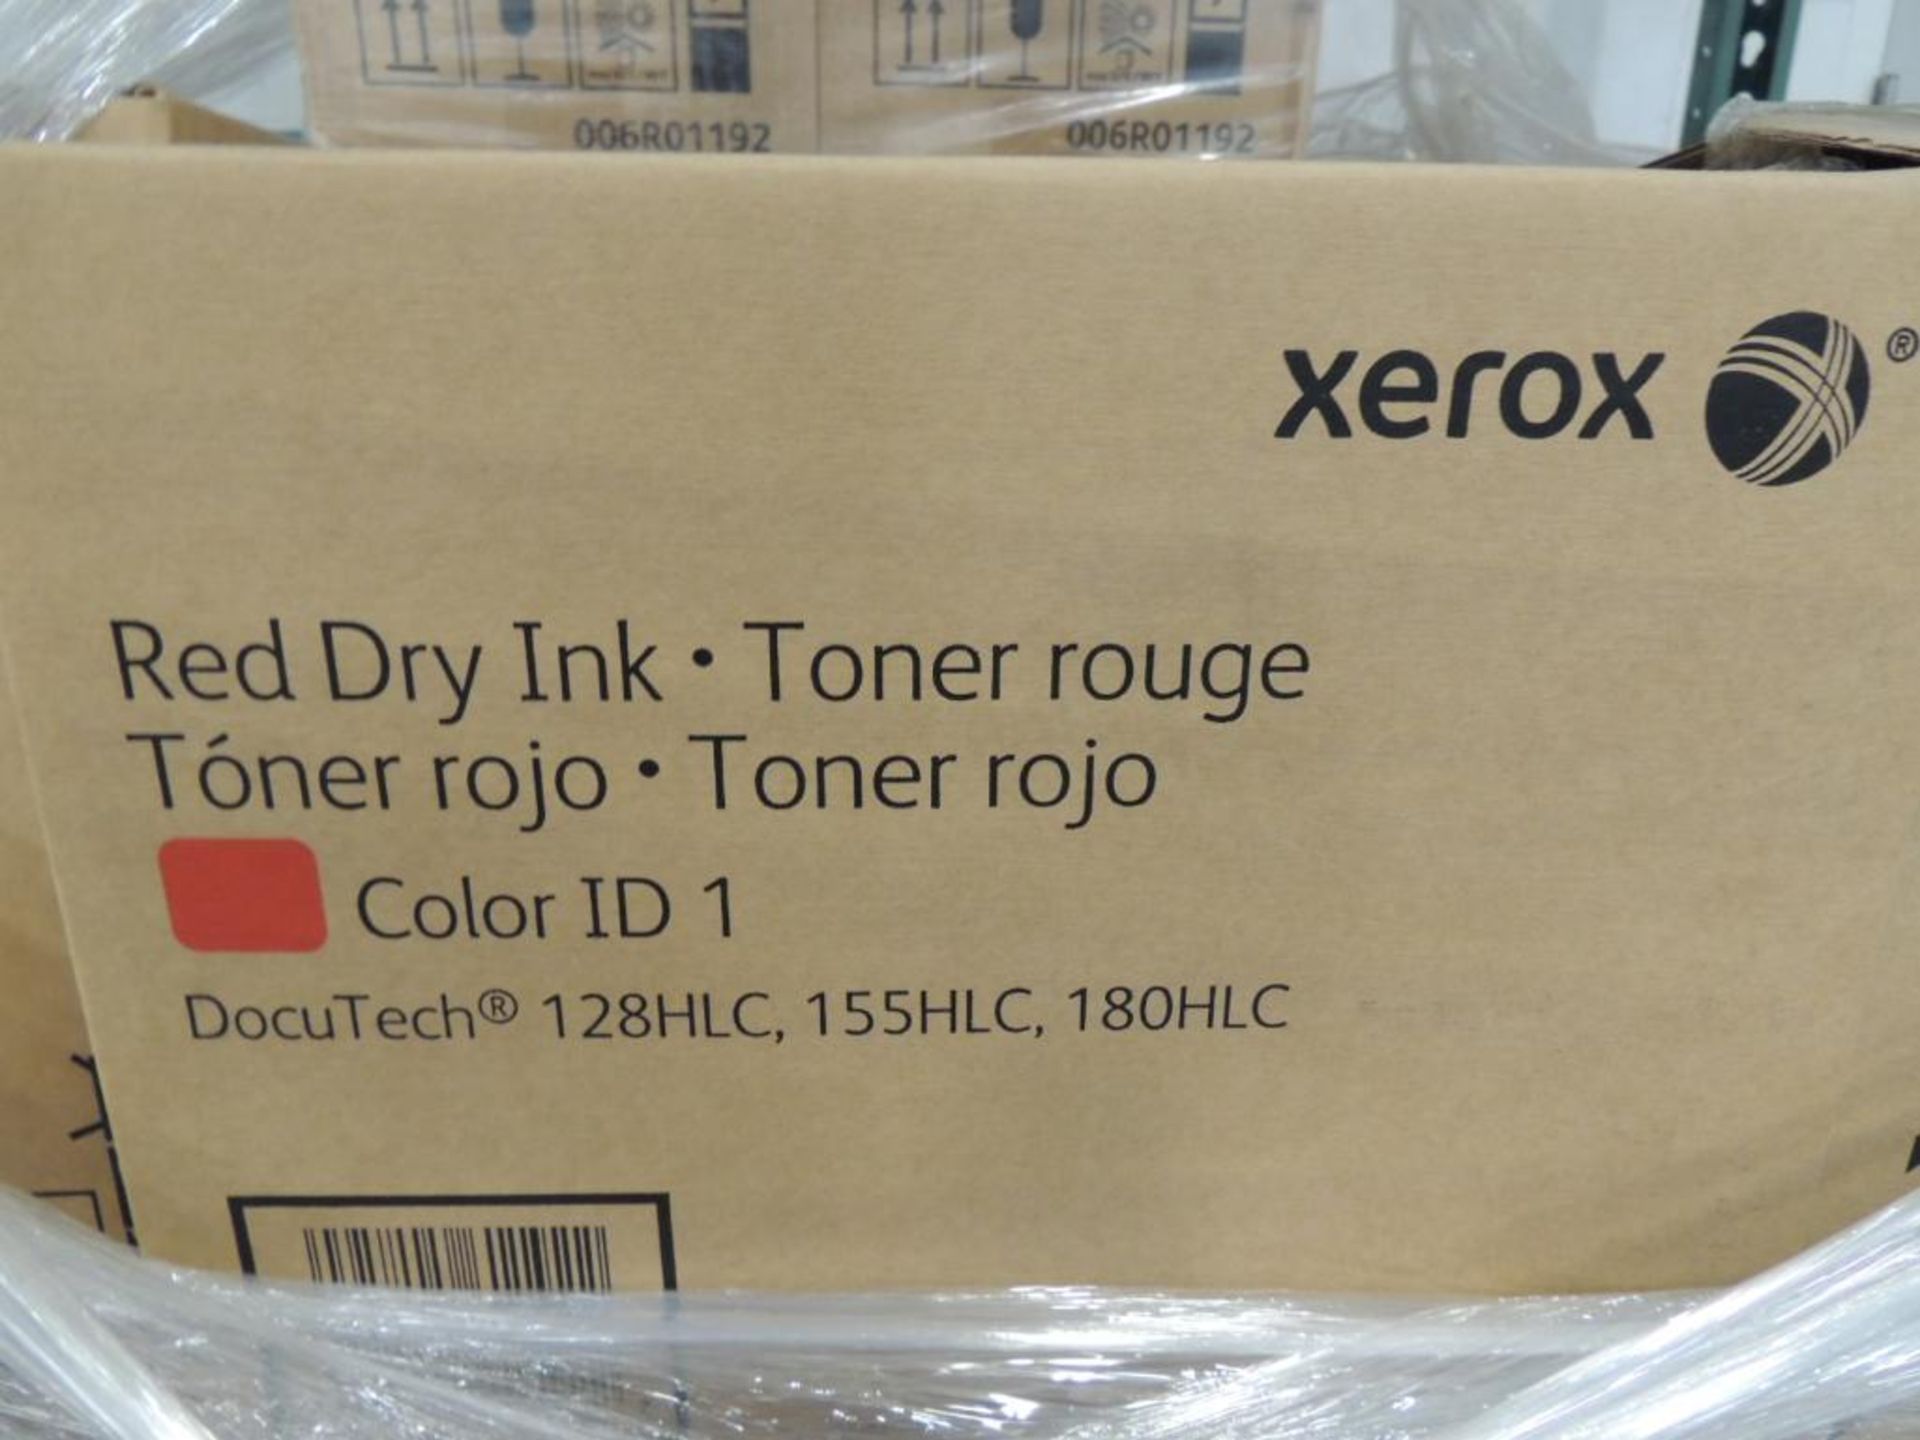 LOT: Xerox Color ID 2 Cartridges, Fits Docutech 128, 155, 180 HLC Machines, (10) Cases Blue, (16) Ca - Image 2 of 3